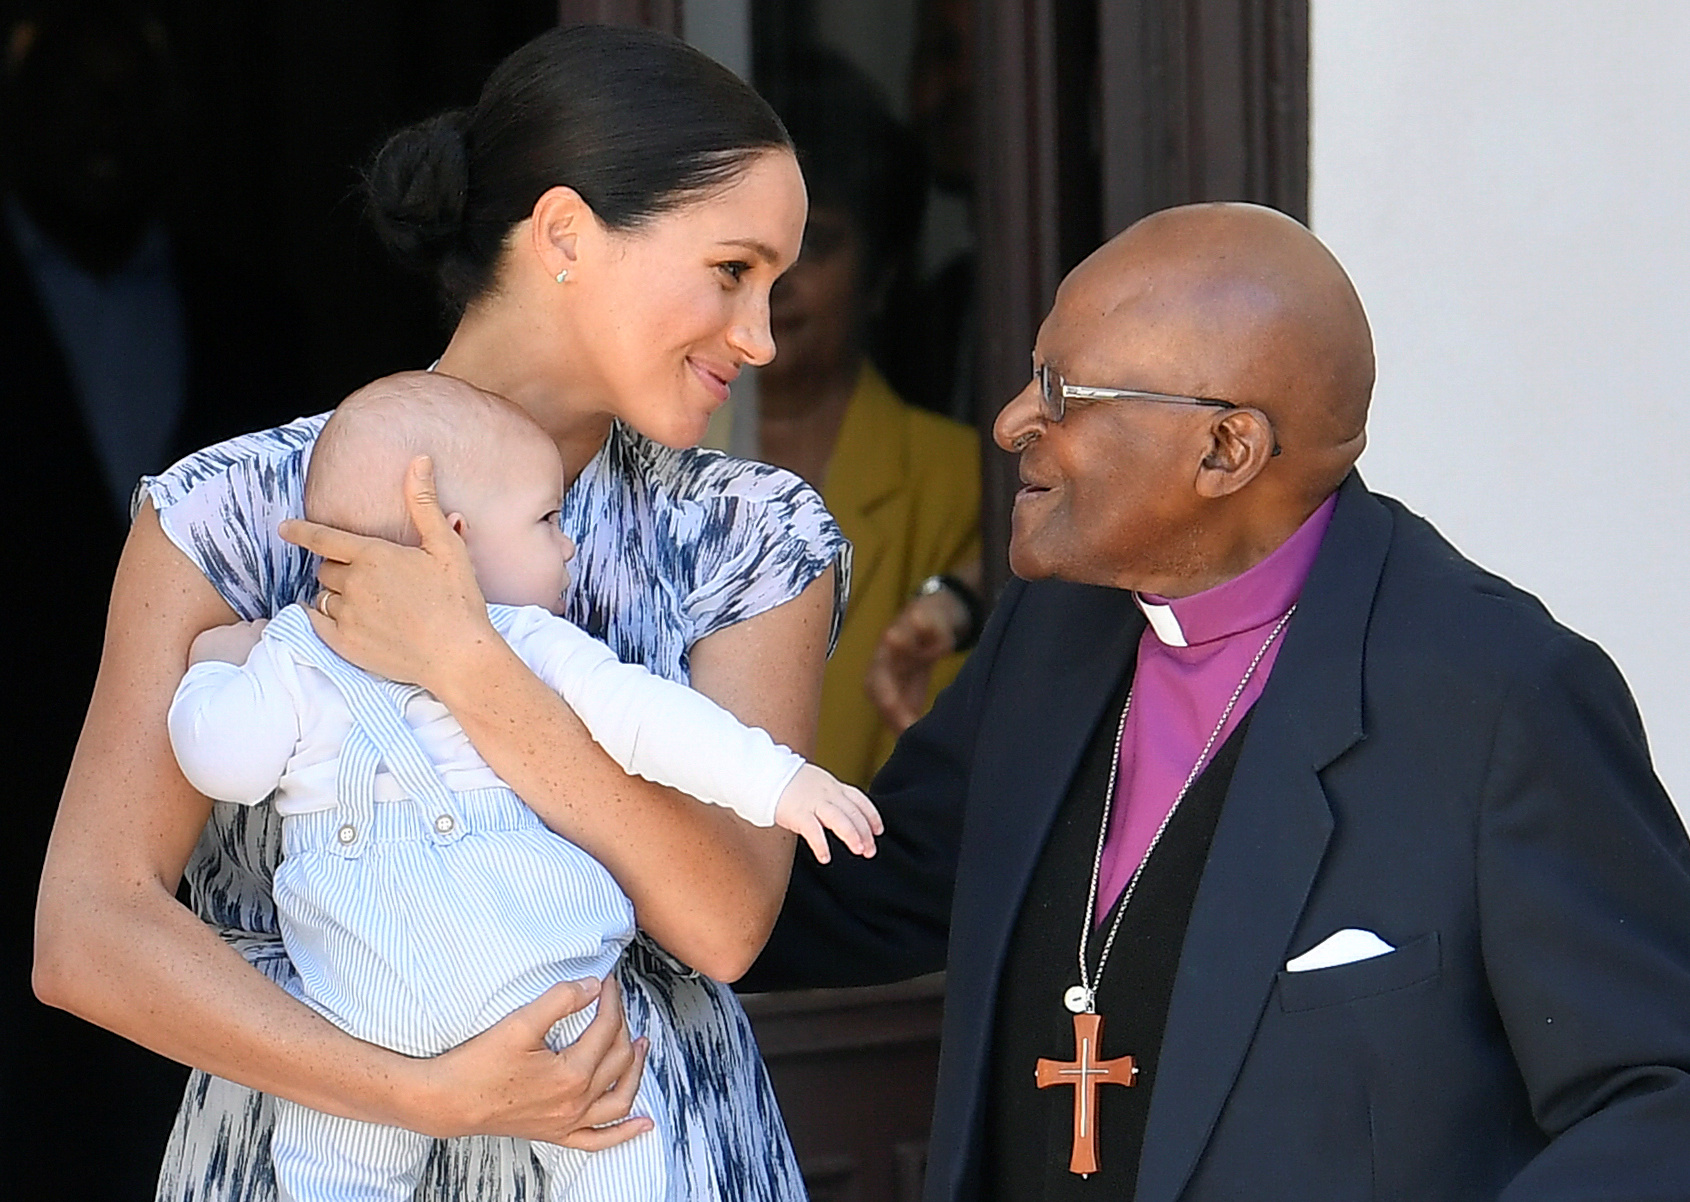 Meghan, Duchess of Sussex speaks to Archbishop Desmond Tutu while holding her baby son Archie Mountbatten-Windsor, during a visit to the Desmond & Leah Tutu Legacy Foundation during their royal tour of South Africa on September 25, 2019 in Cape Town, South Africa. (Photo by Toby Melville - Pool/Getty Images)